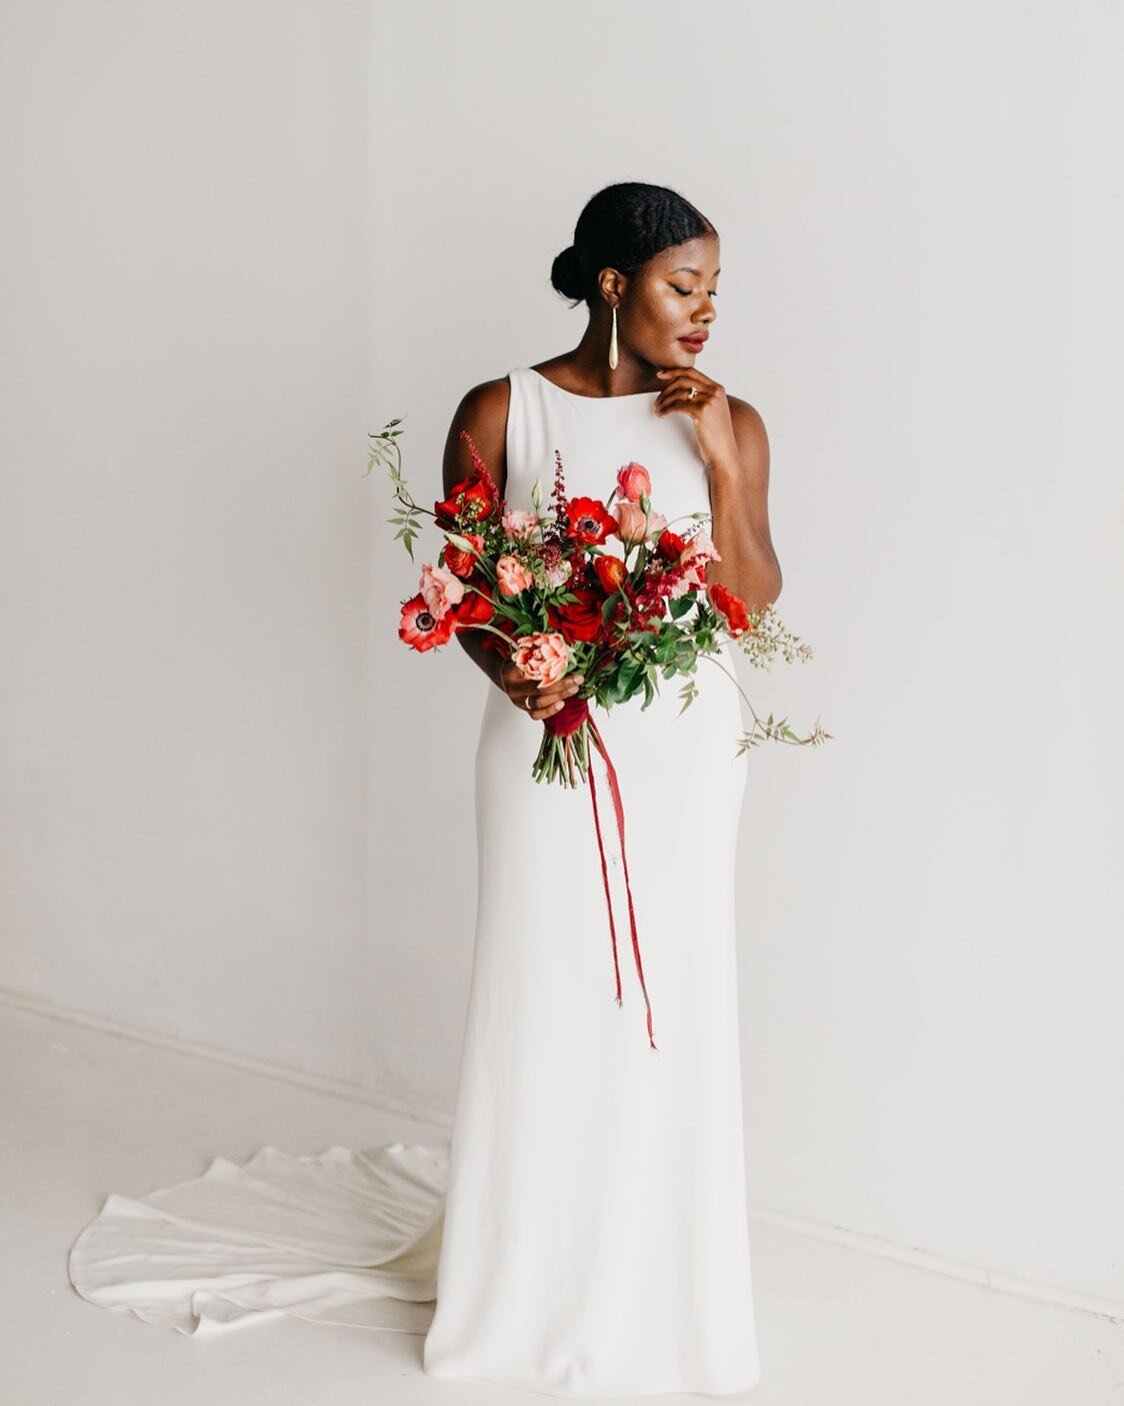 Can&rsquo;t stop starting at ya @arielle.shanice 🌹 let&rsquo;s vow to add more red in your bouquets guys 😍
.
.
.
.
.
#theantibride #antibrideweddings #floridawedding #floridaweddingplanner #weddingplanner #floridaweddingflorist #weddingflowers #tha